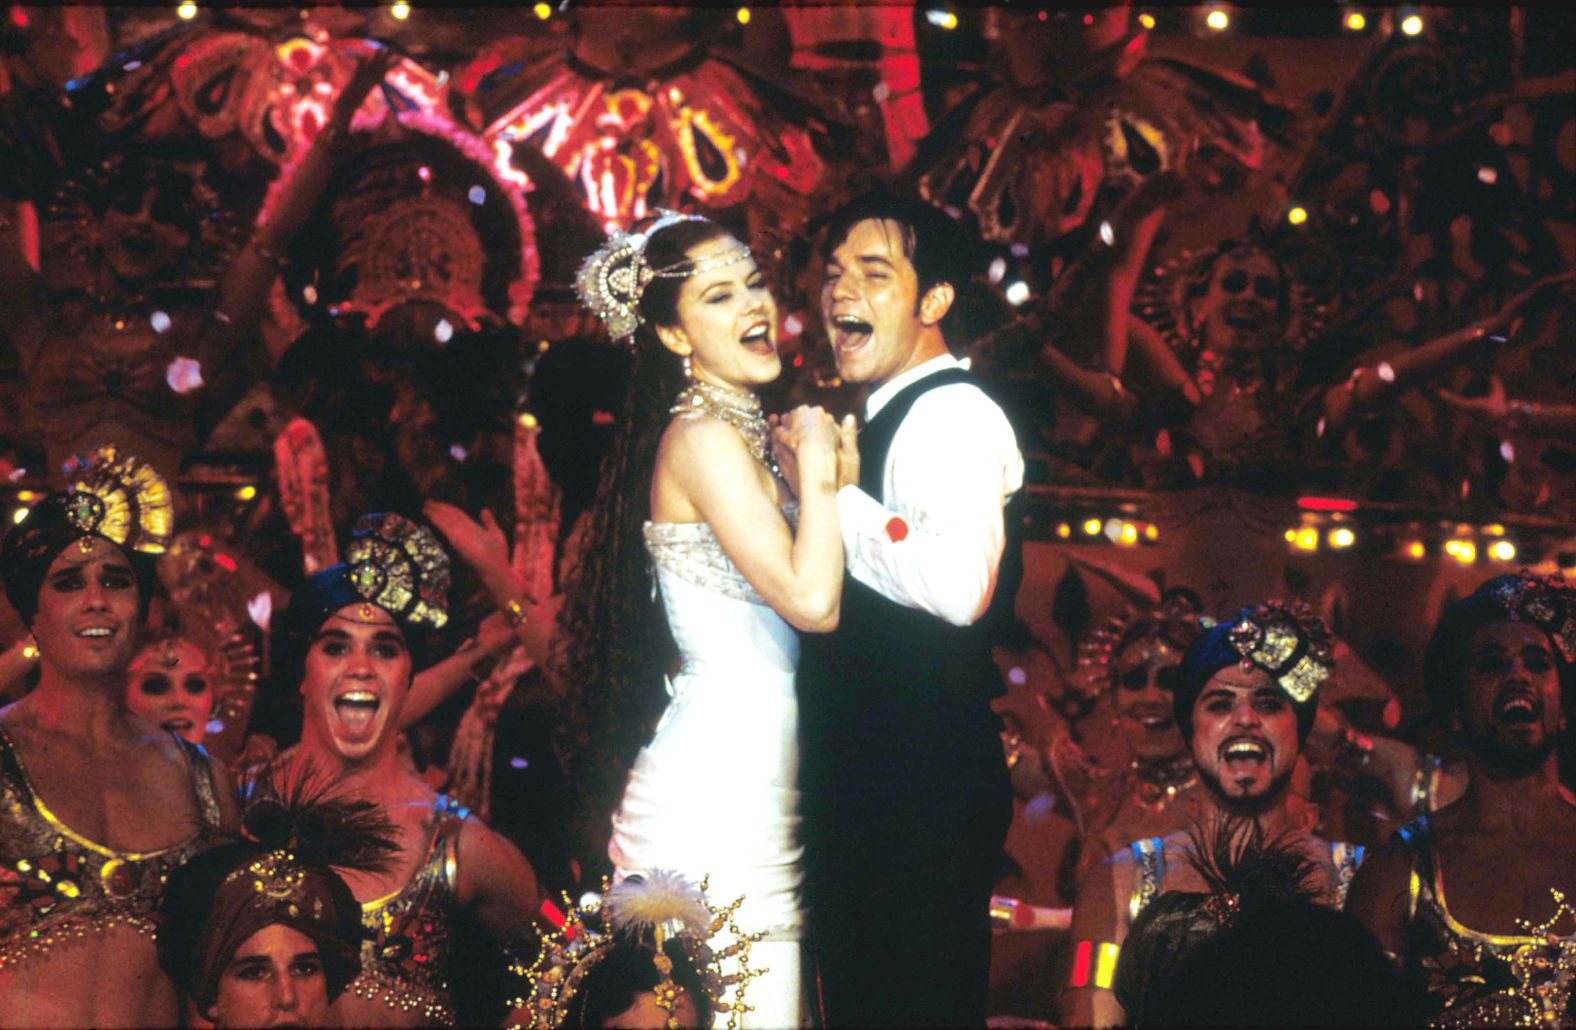 Kidman, here with Ewan McGregor, received her first Academy Award nomination for her role in 2001's "Moulin Rouge!"